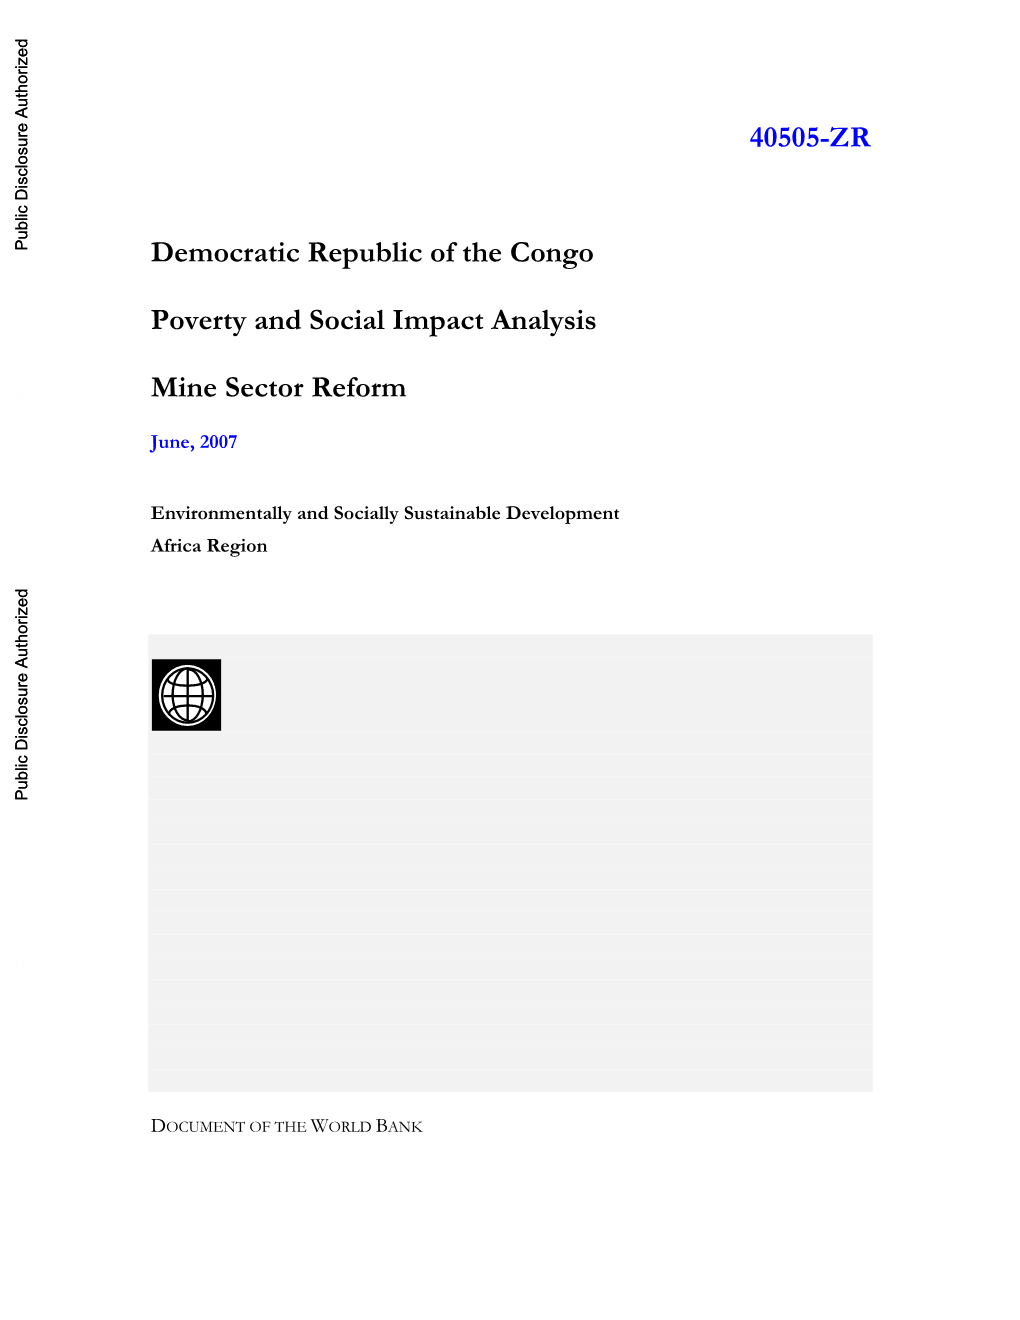 Democratic Republic of the Congo Poverty and Social Impact Analysis